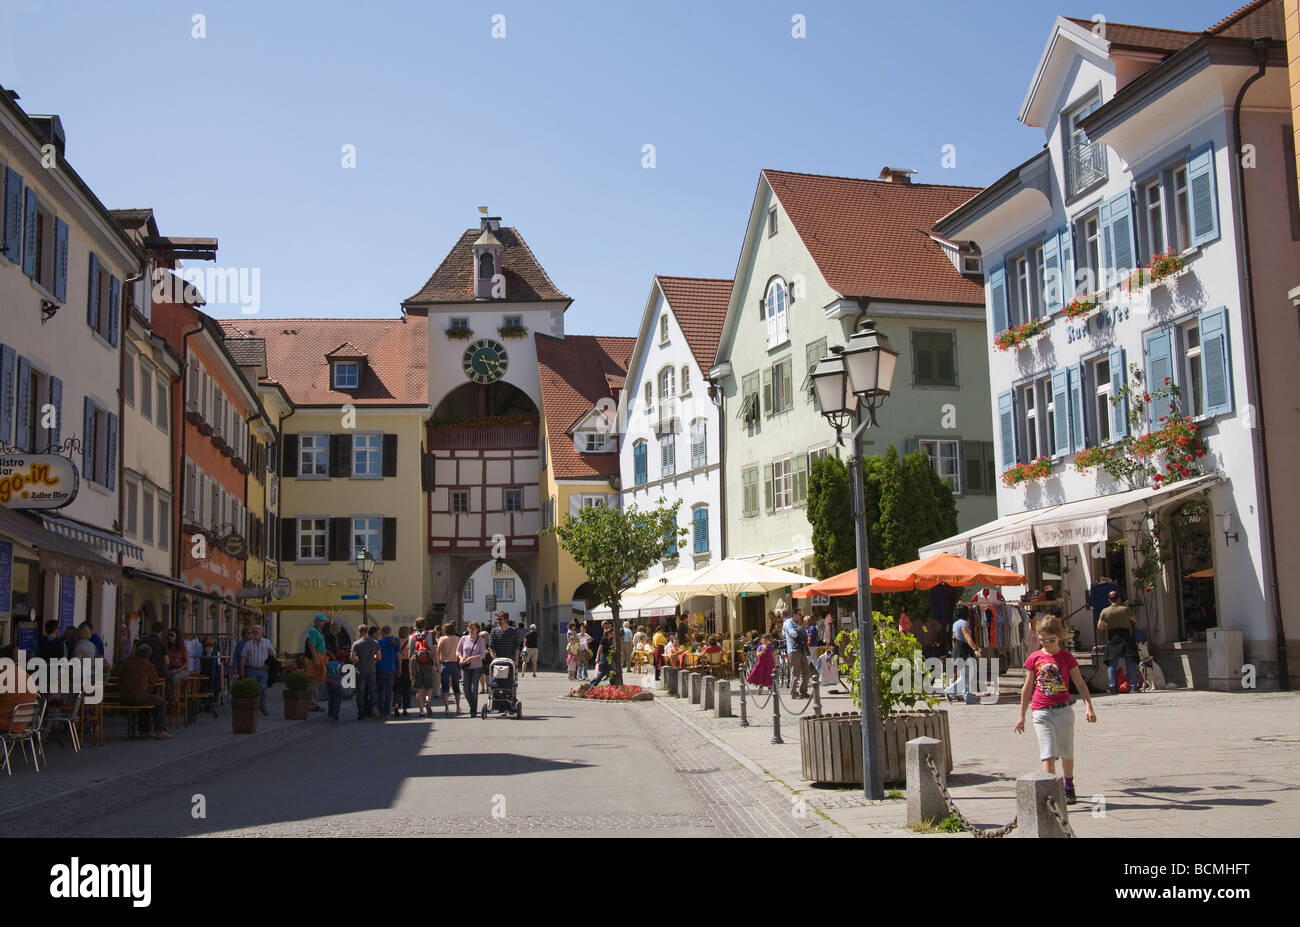 Meersburg Baden Wurttemberg Germany EU View along main street in Unterstadt this medieval lower town to a gate house tower Stock Photo